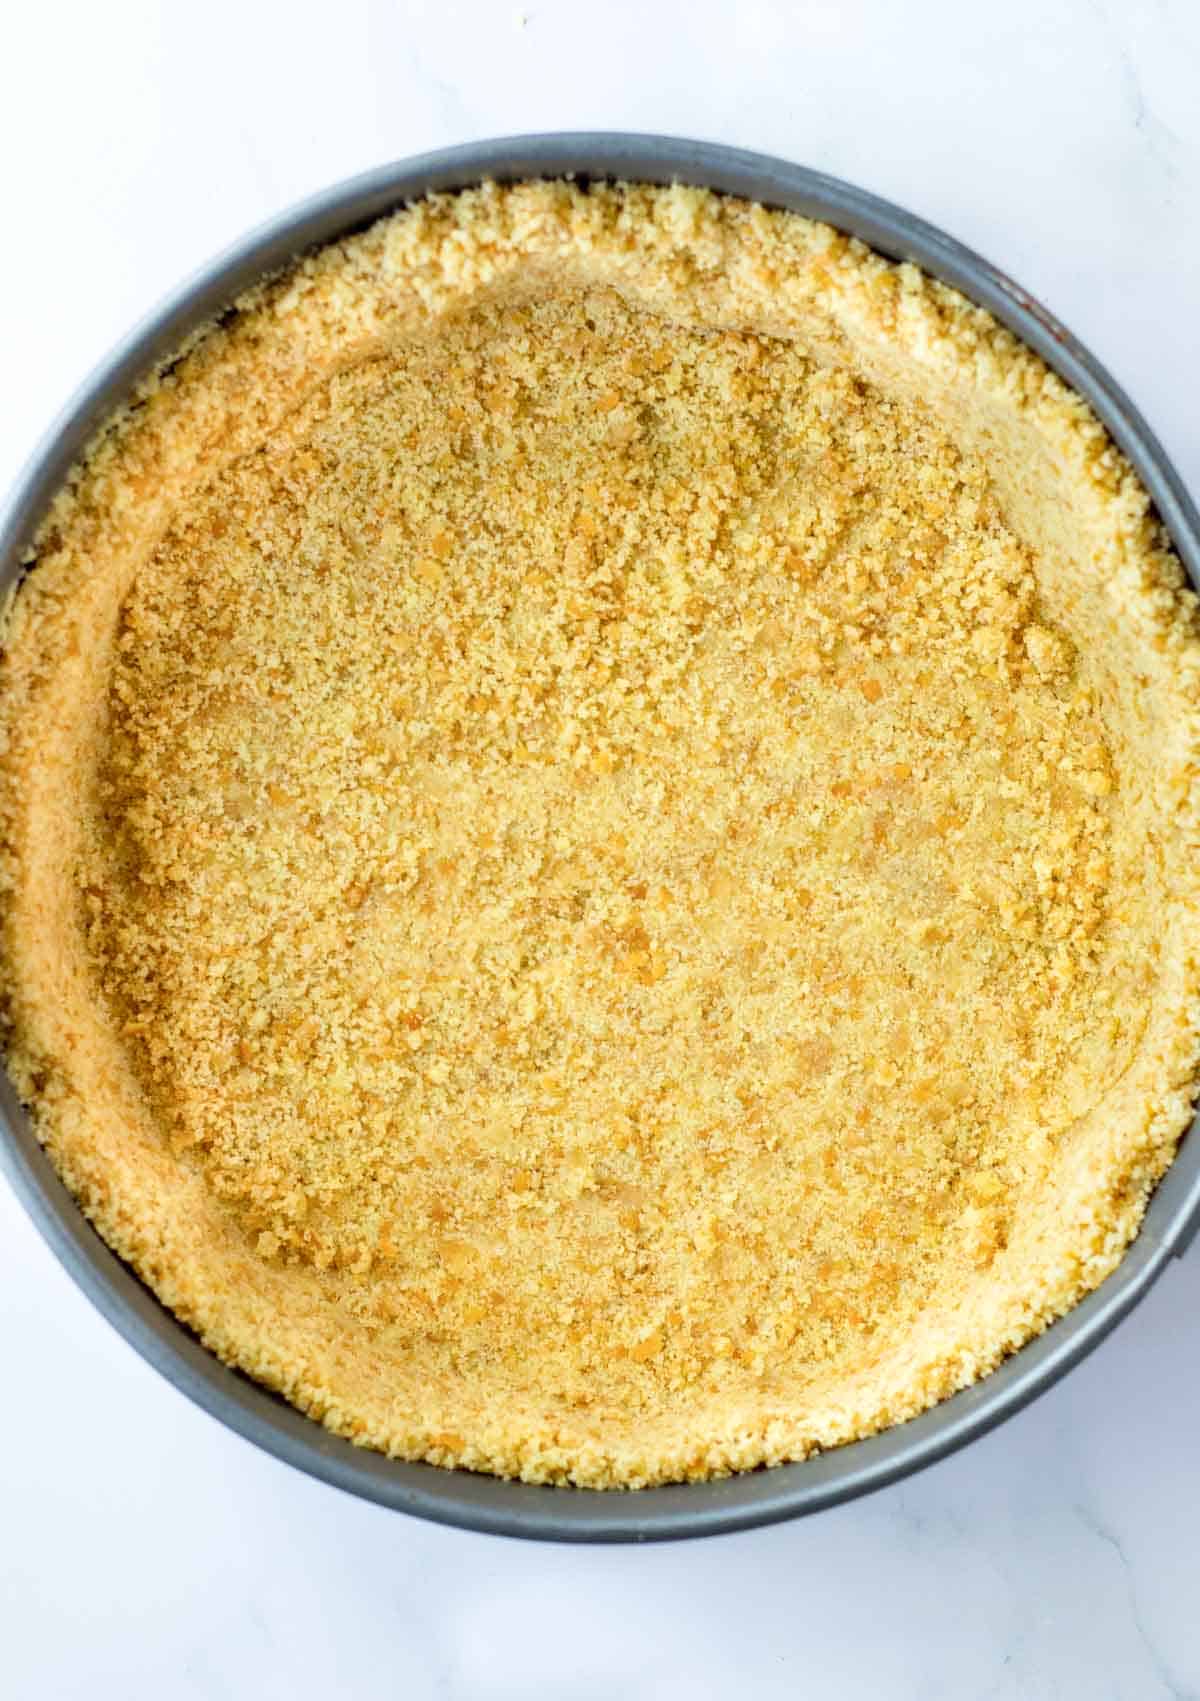 nilla wafer crumbs in bottom of spring form pan